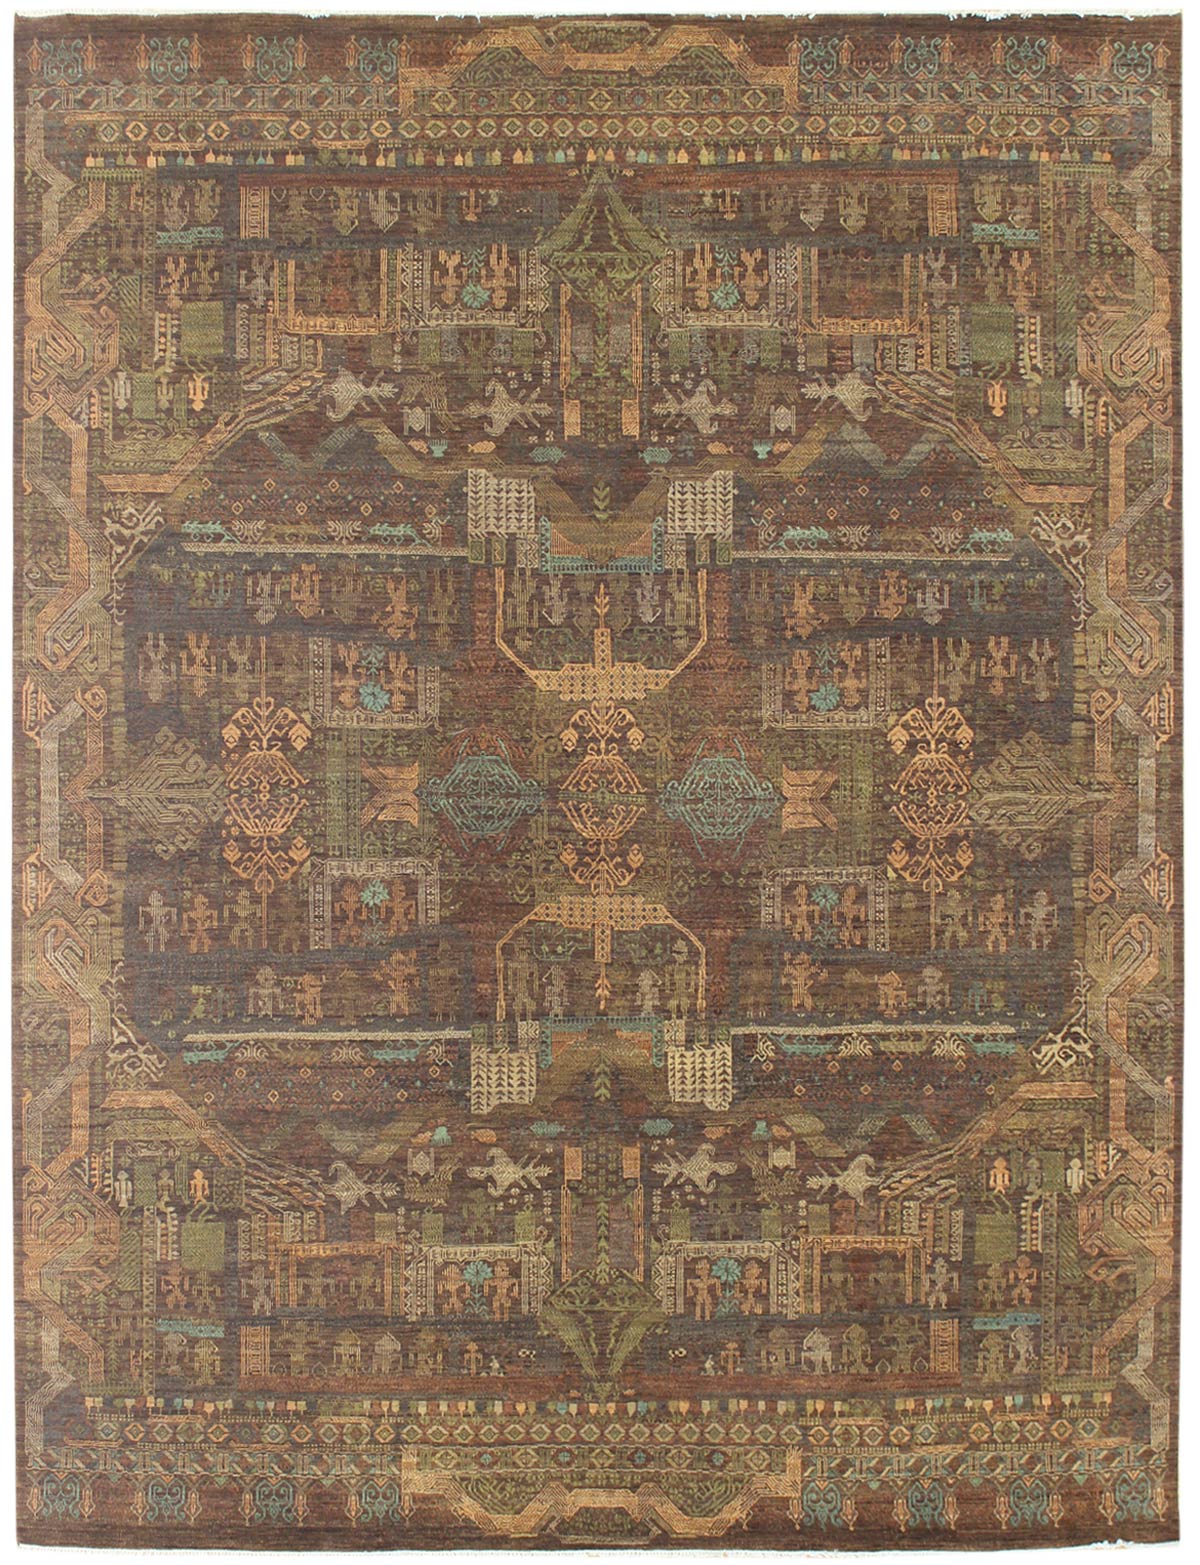 Indian Pictorial Handwoven Transitional Rug